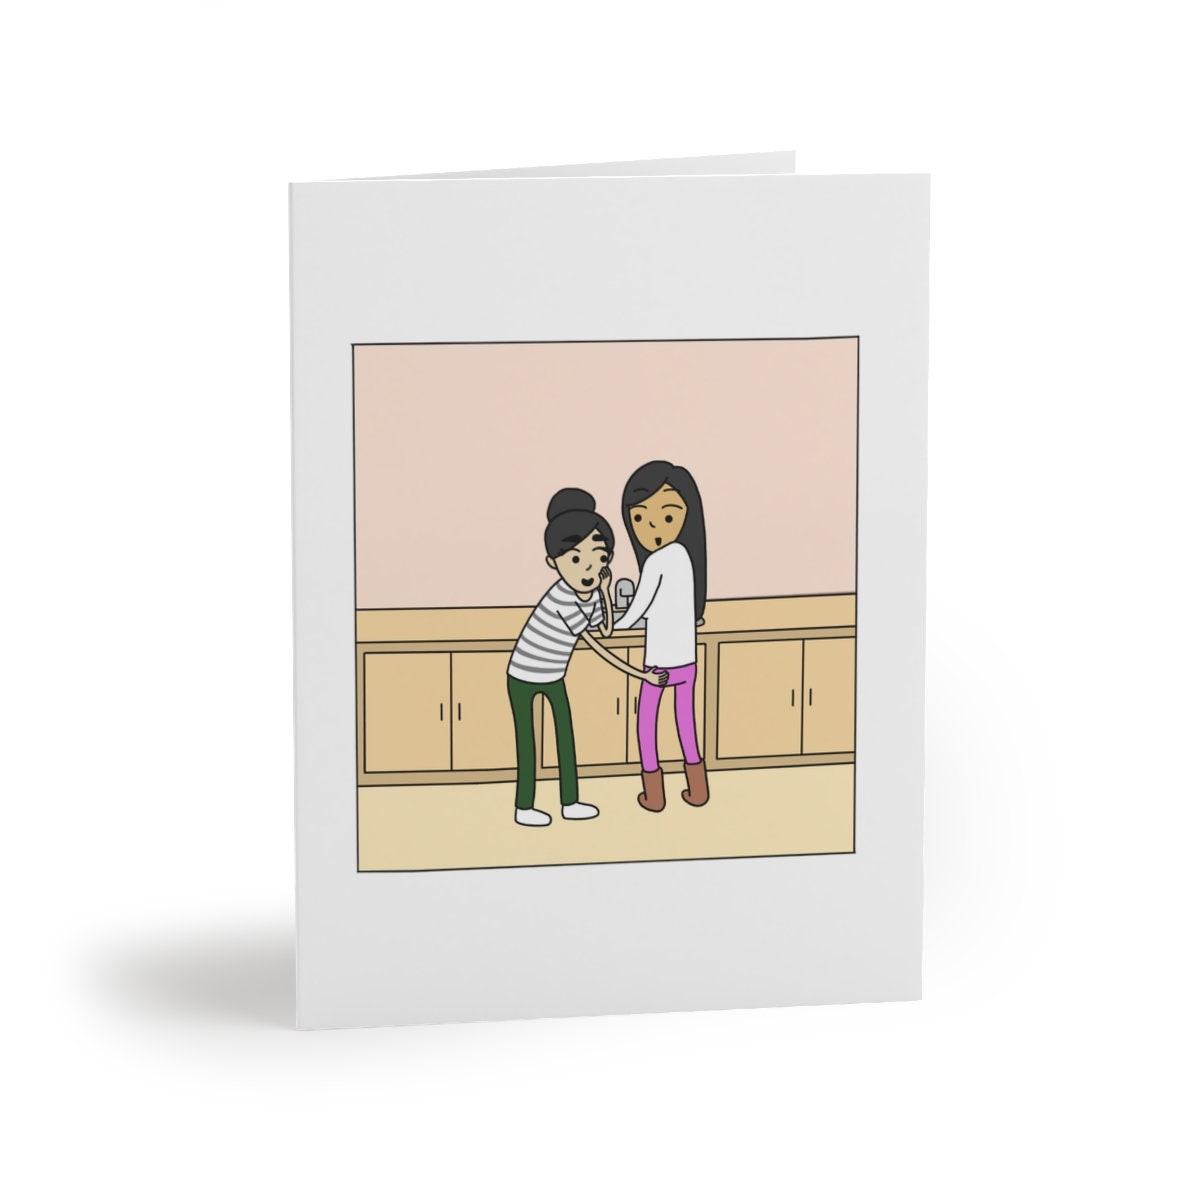 You're My Main Squeeze | Funny Punny Lesbian Card | Cute LGBTQ Valentine's Day or Anniversary Gift | WLW Humor | Sapphic Love Greeting Card